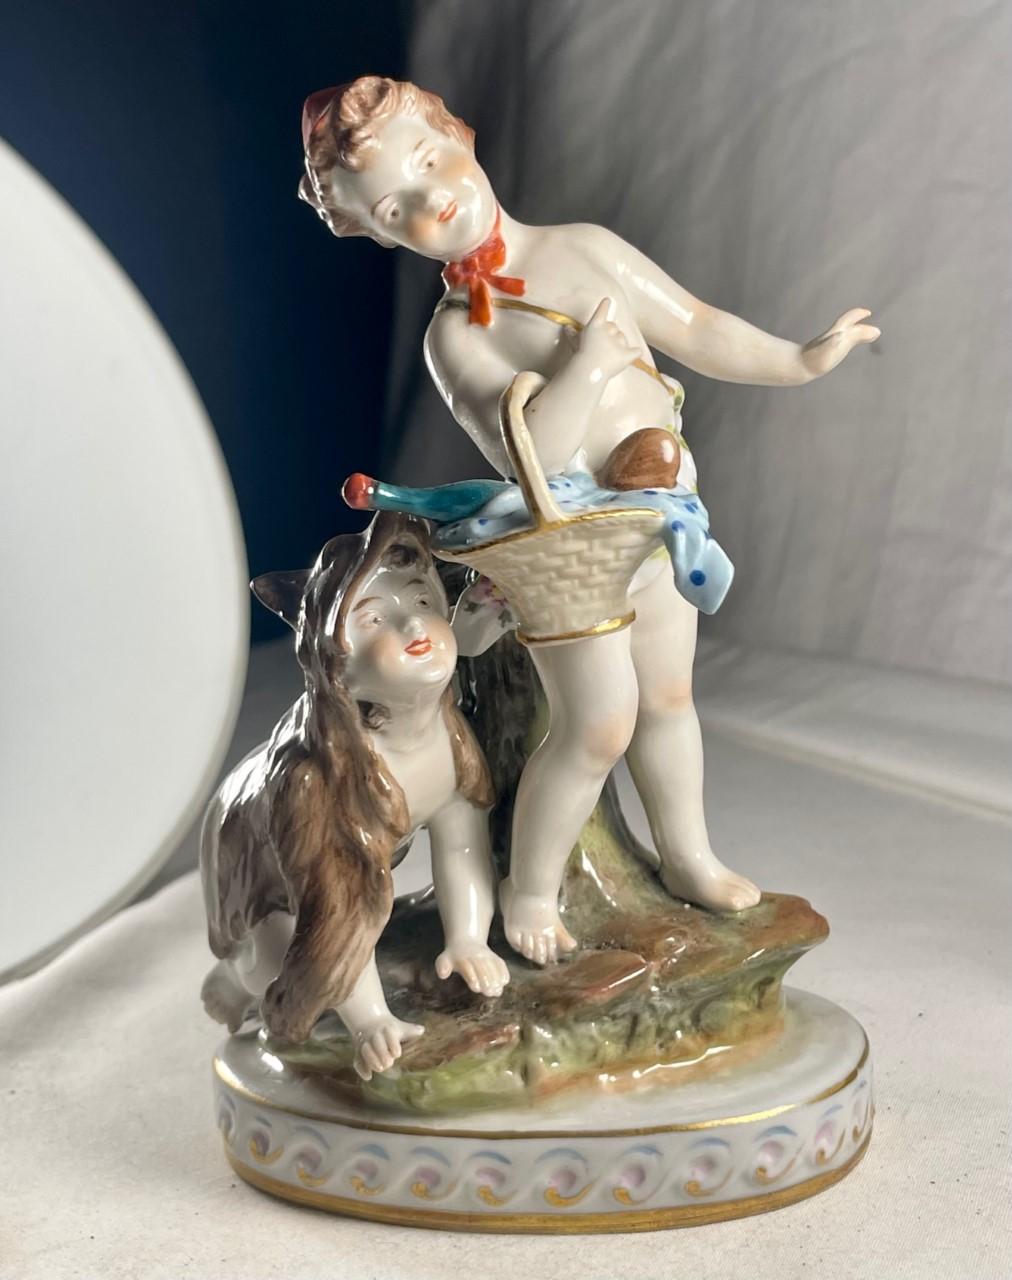 Italian Early 20th century Naples Polychrome Porcelain Sculptural Group.

Charming antique Italian Naples polychrome hand painted joyfully playing children in porcelain. The miniature sculpture is beautifully modeled with superb detail and